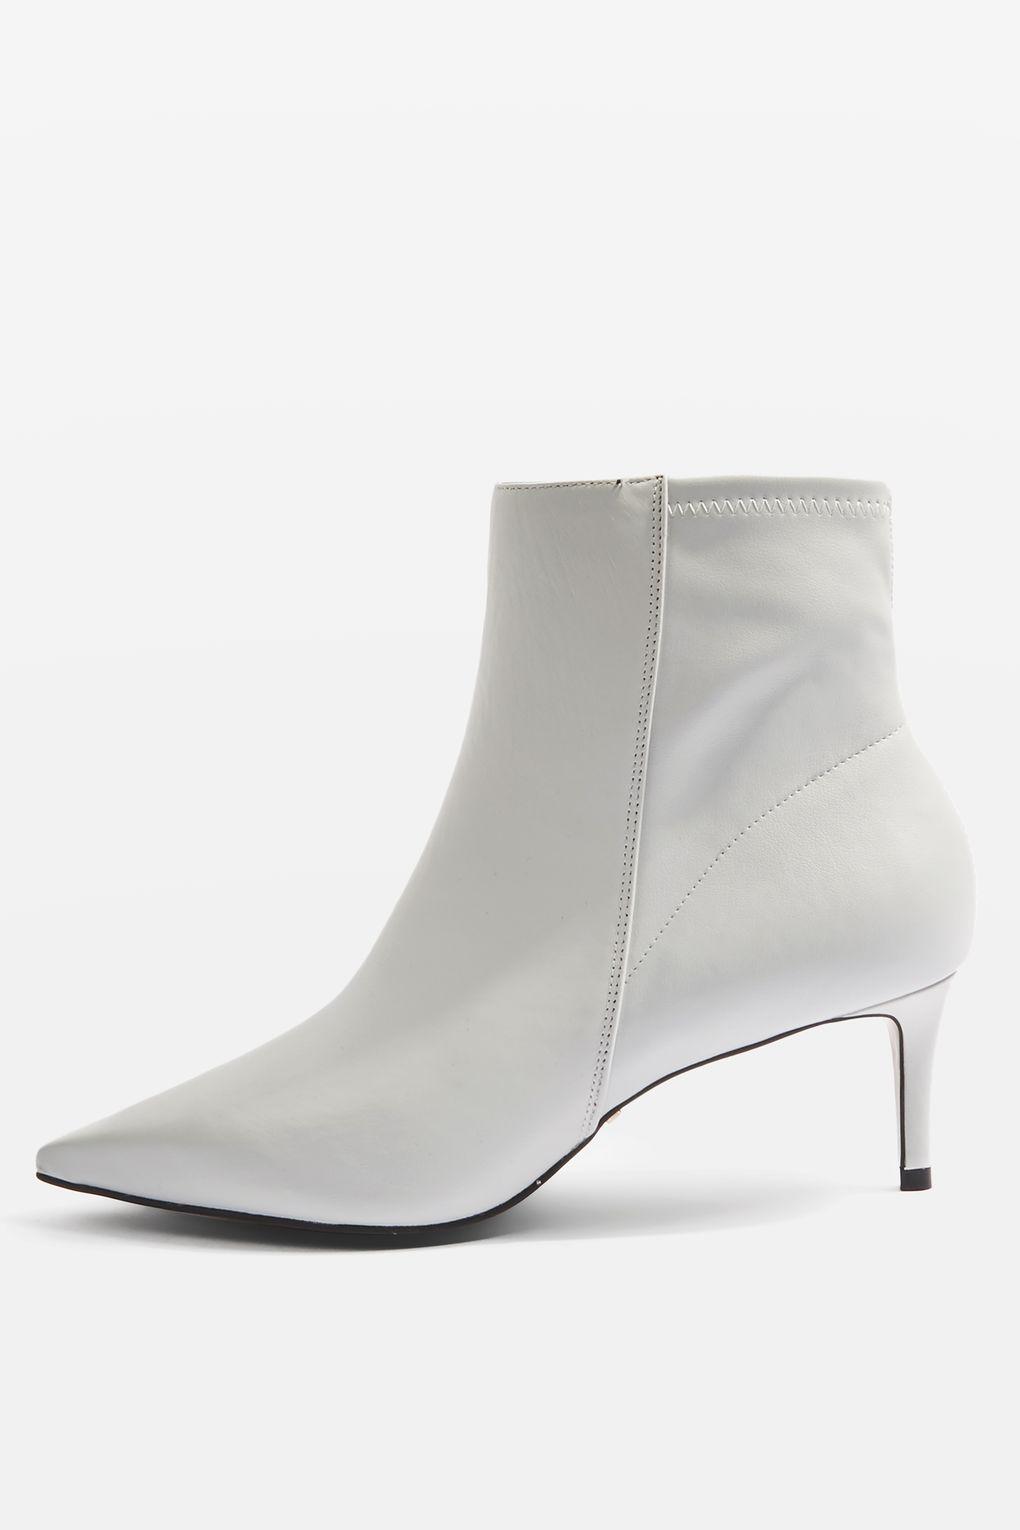 topshop pointed boots